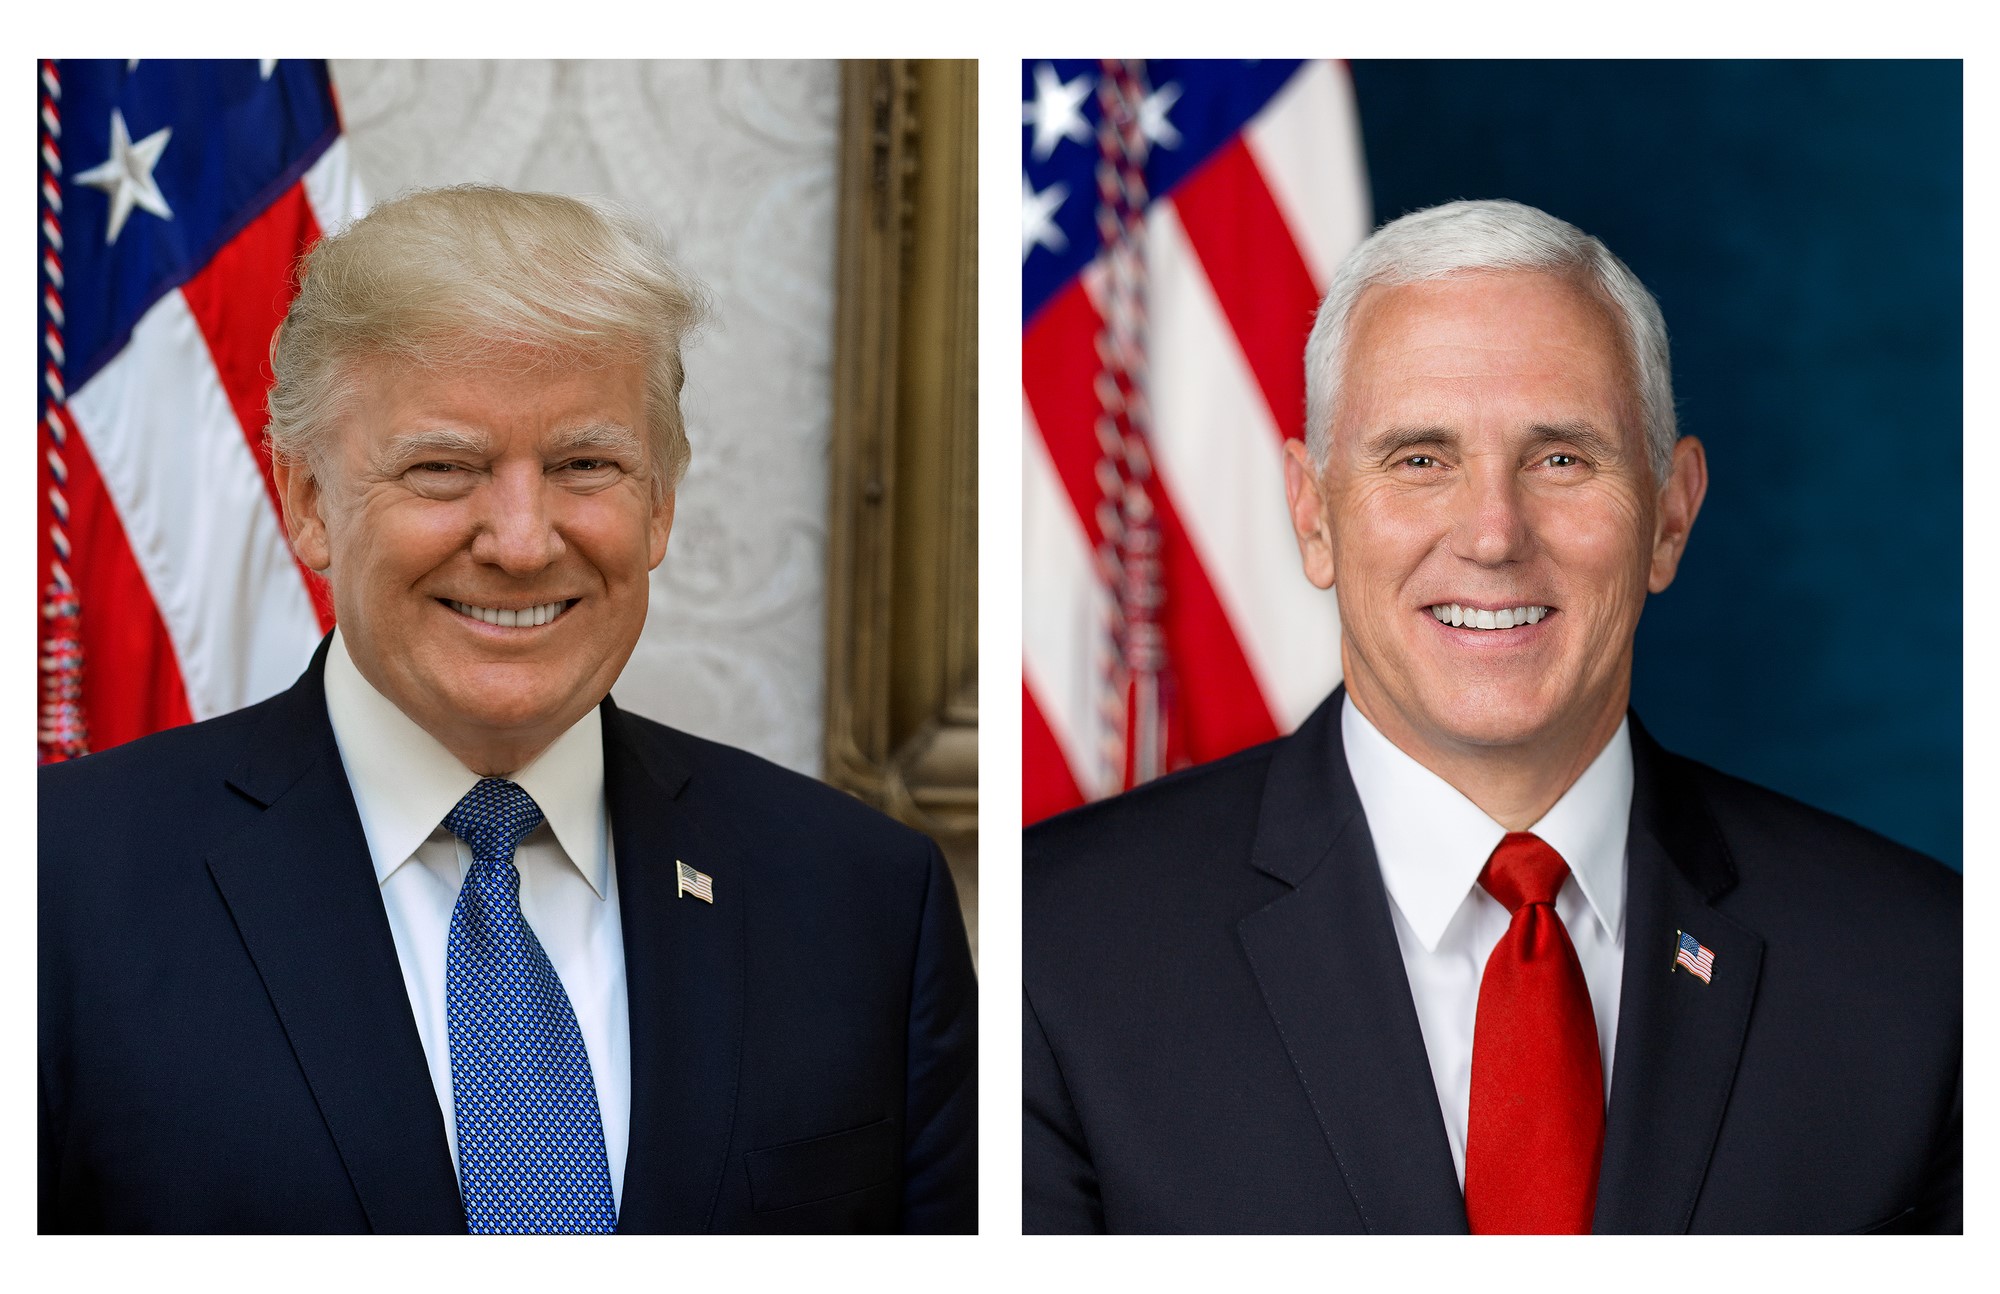 The official portraits of President Donald Trump and Vice President Mike Pence (White House)